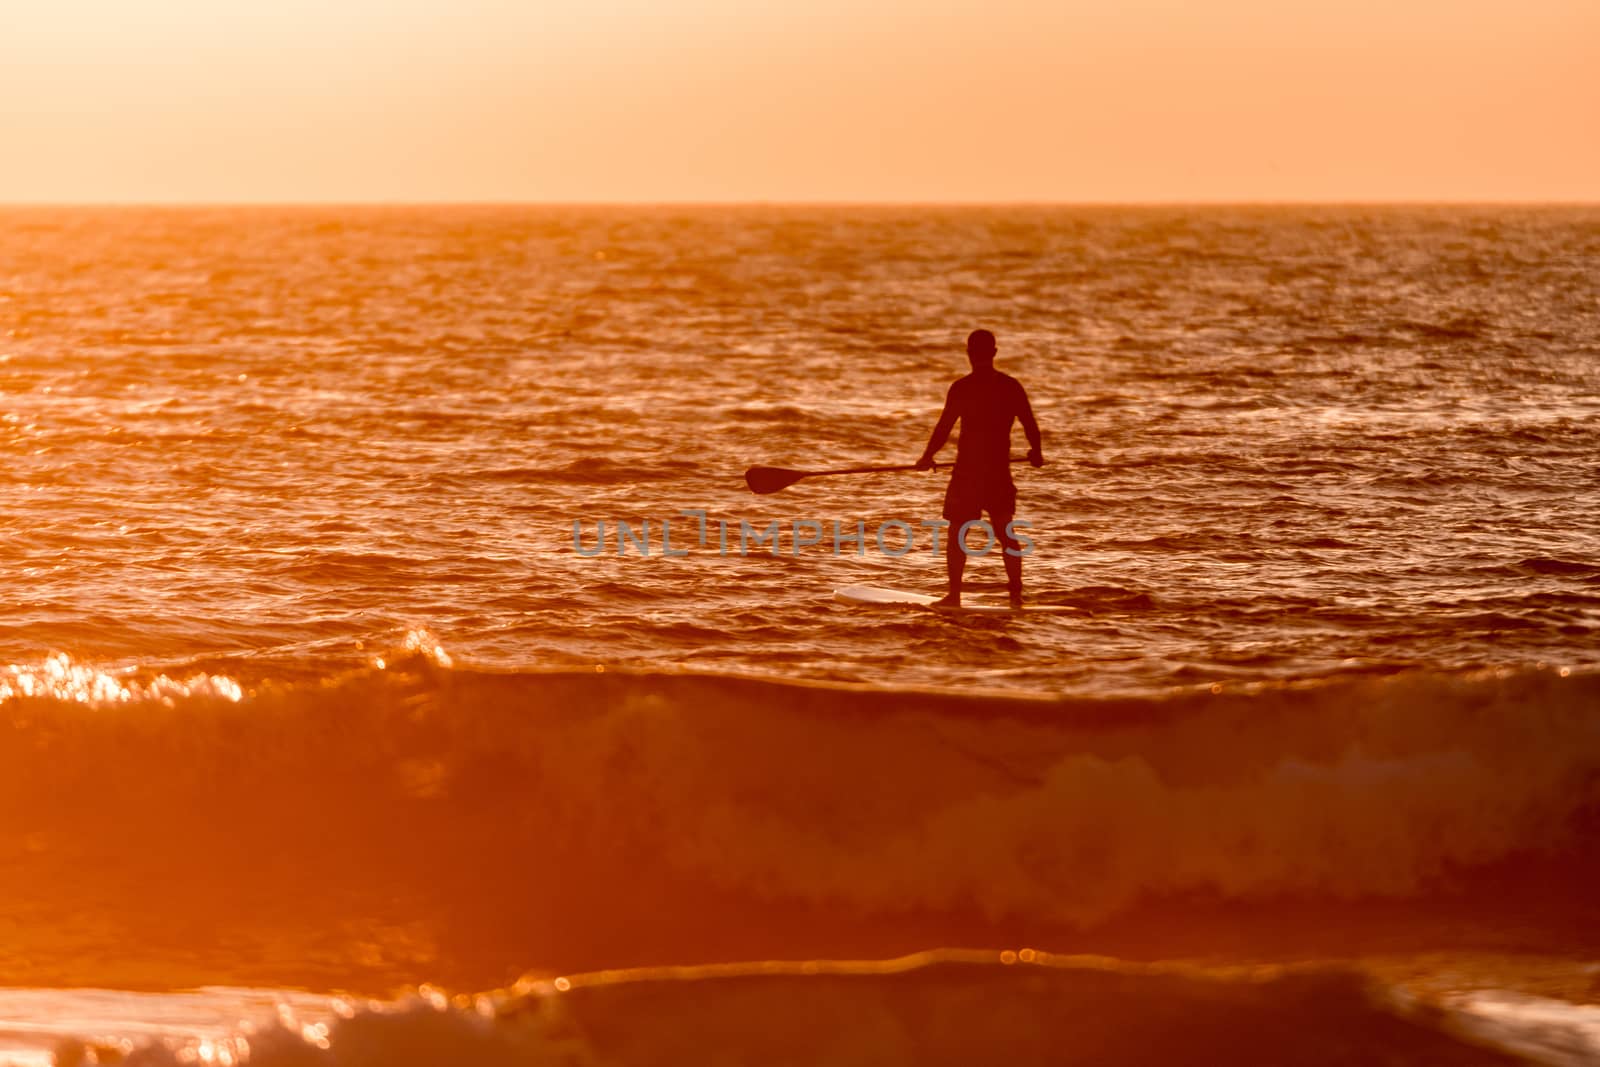 Stand up paddler silhouette at sunset. Concept about sport, surf, vacations and people.